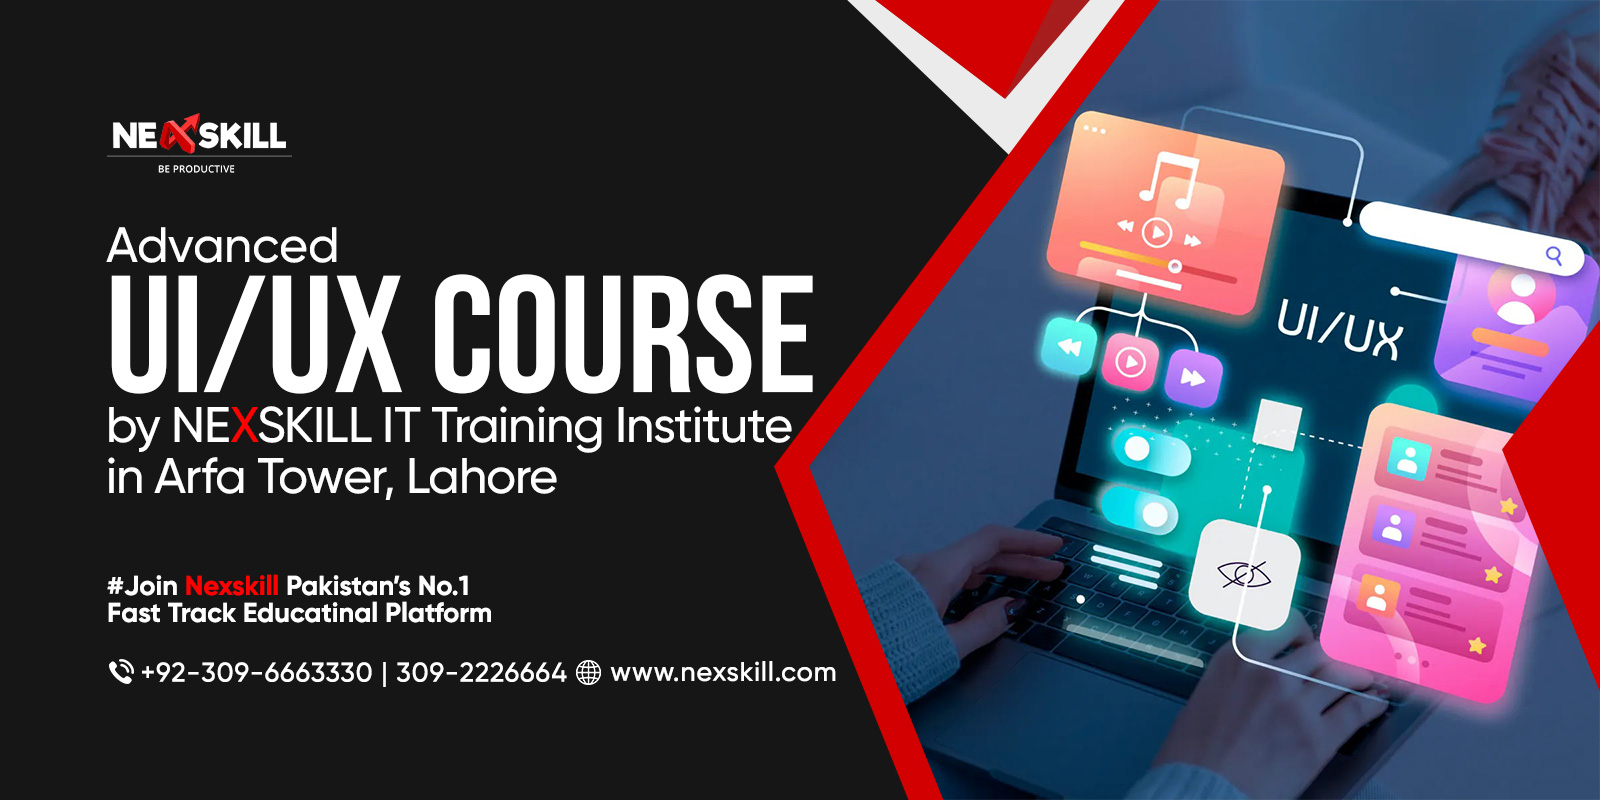 Advanced UI/UX Course by Nexskill IT Training Institute in Arfa Tower, Lahore